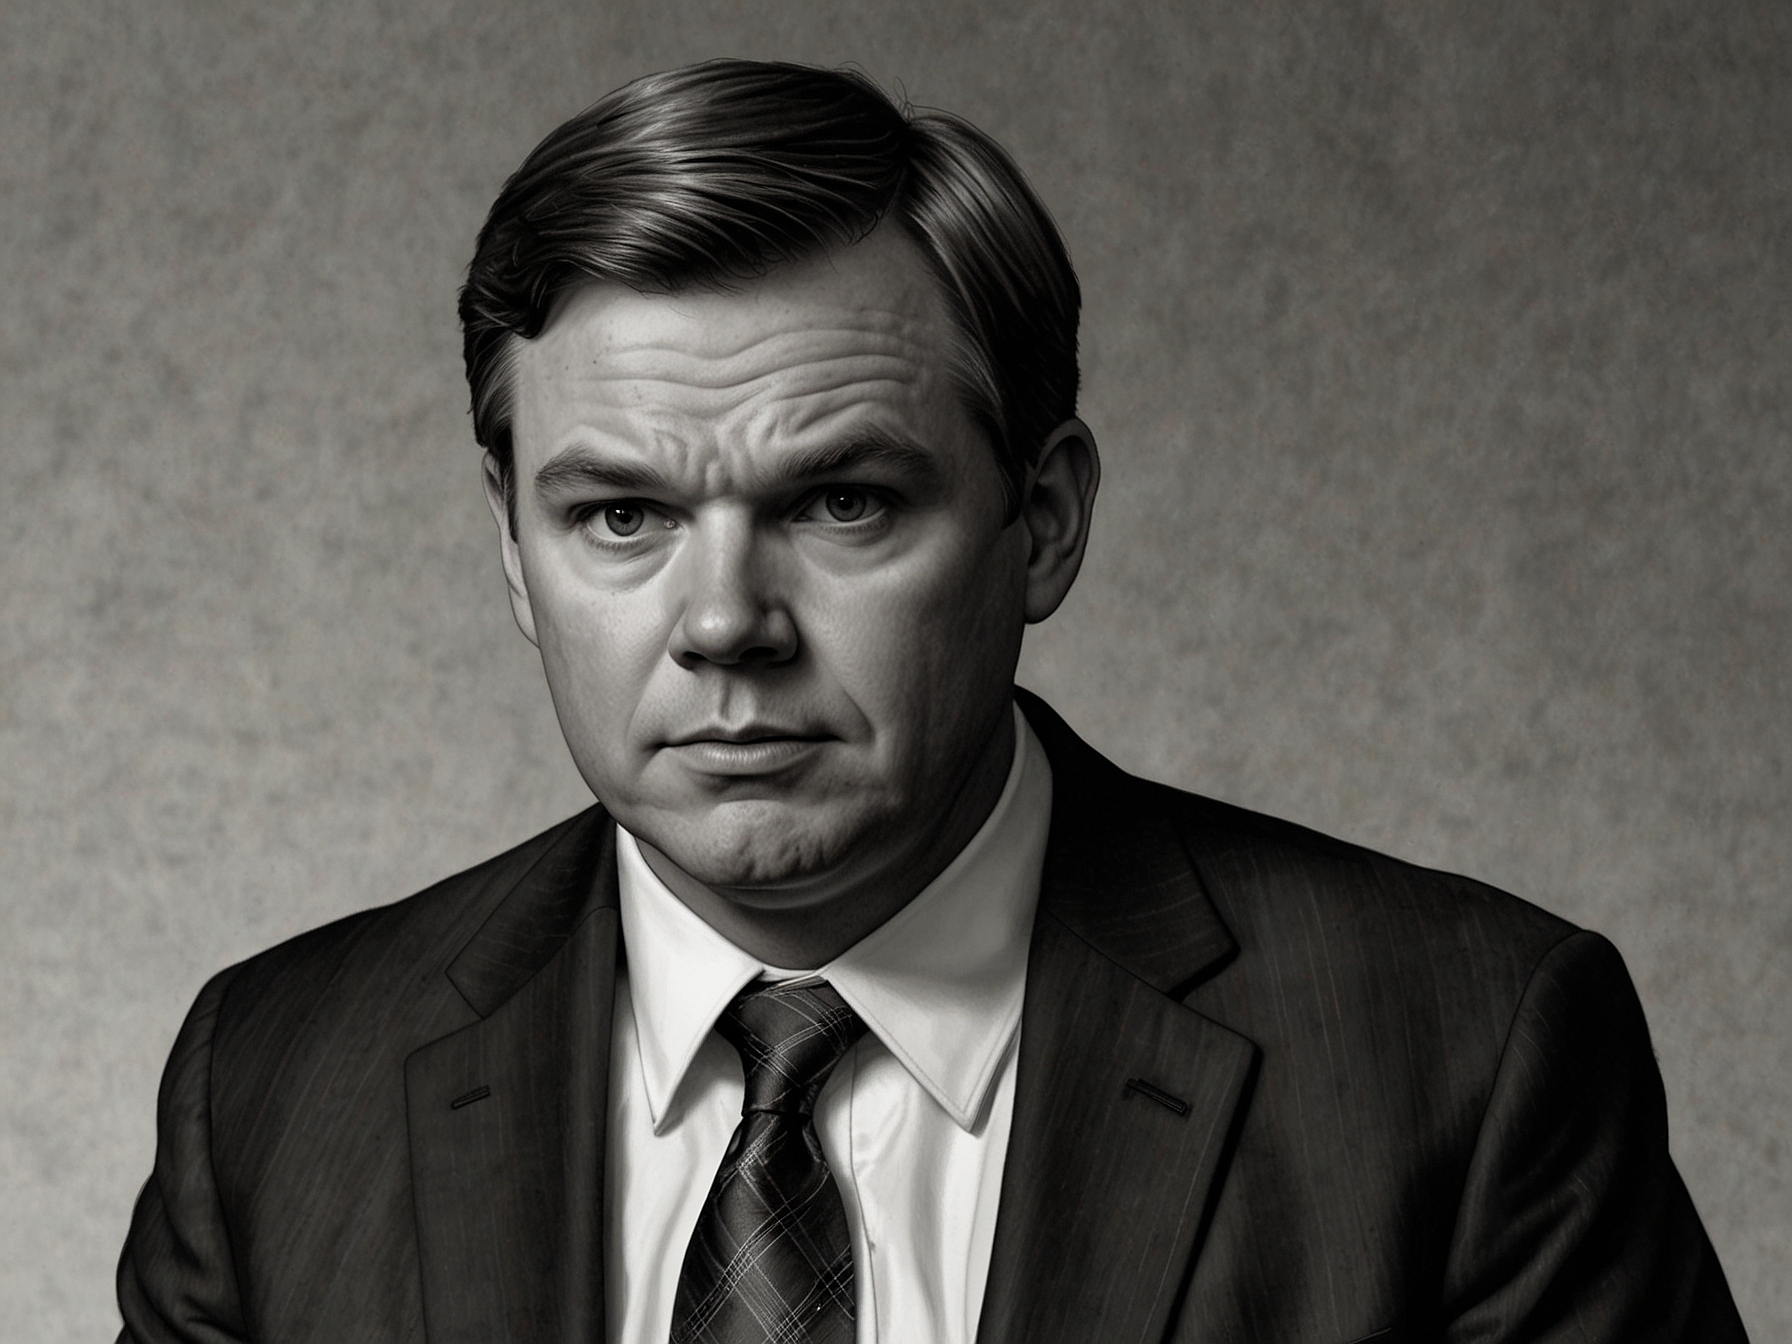 Sen. J.D. Vance giving an interview on Fox News, discussing his ambitions to become Donald Trump's Vice President with a determined expression on his face.